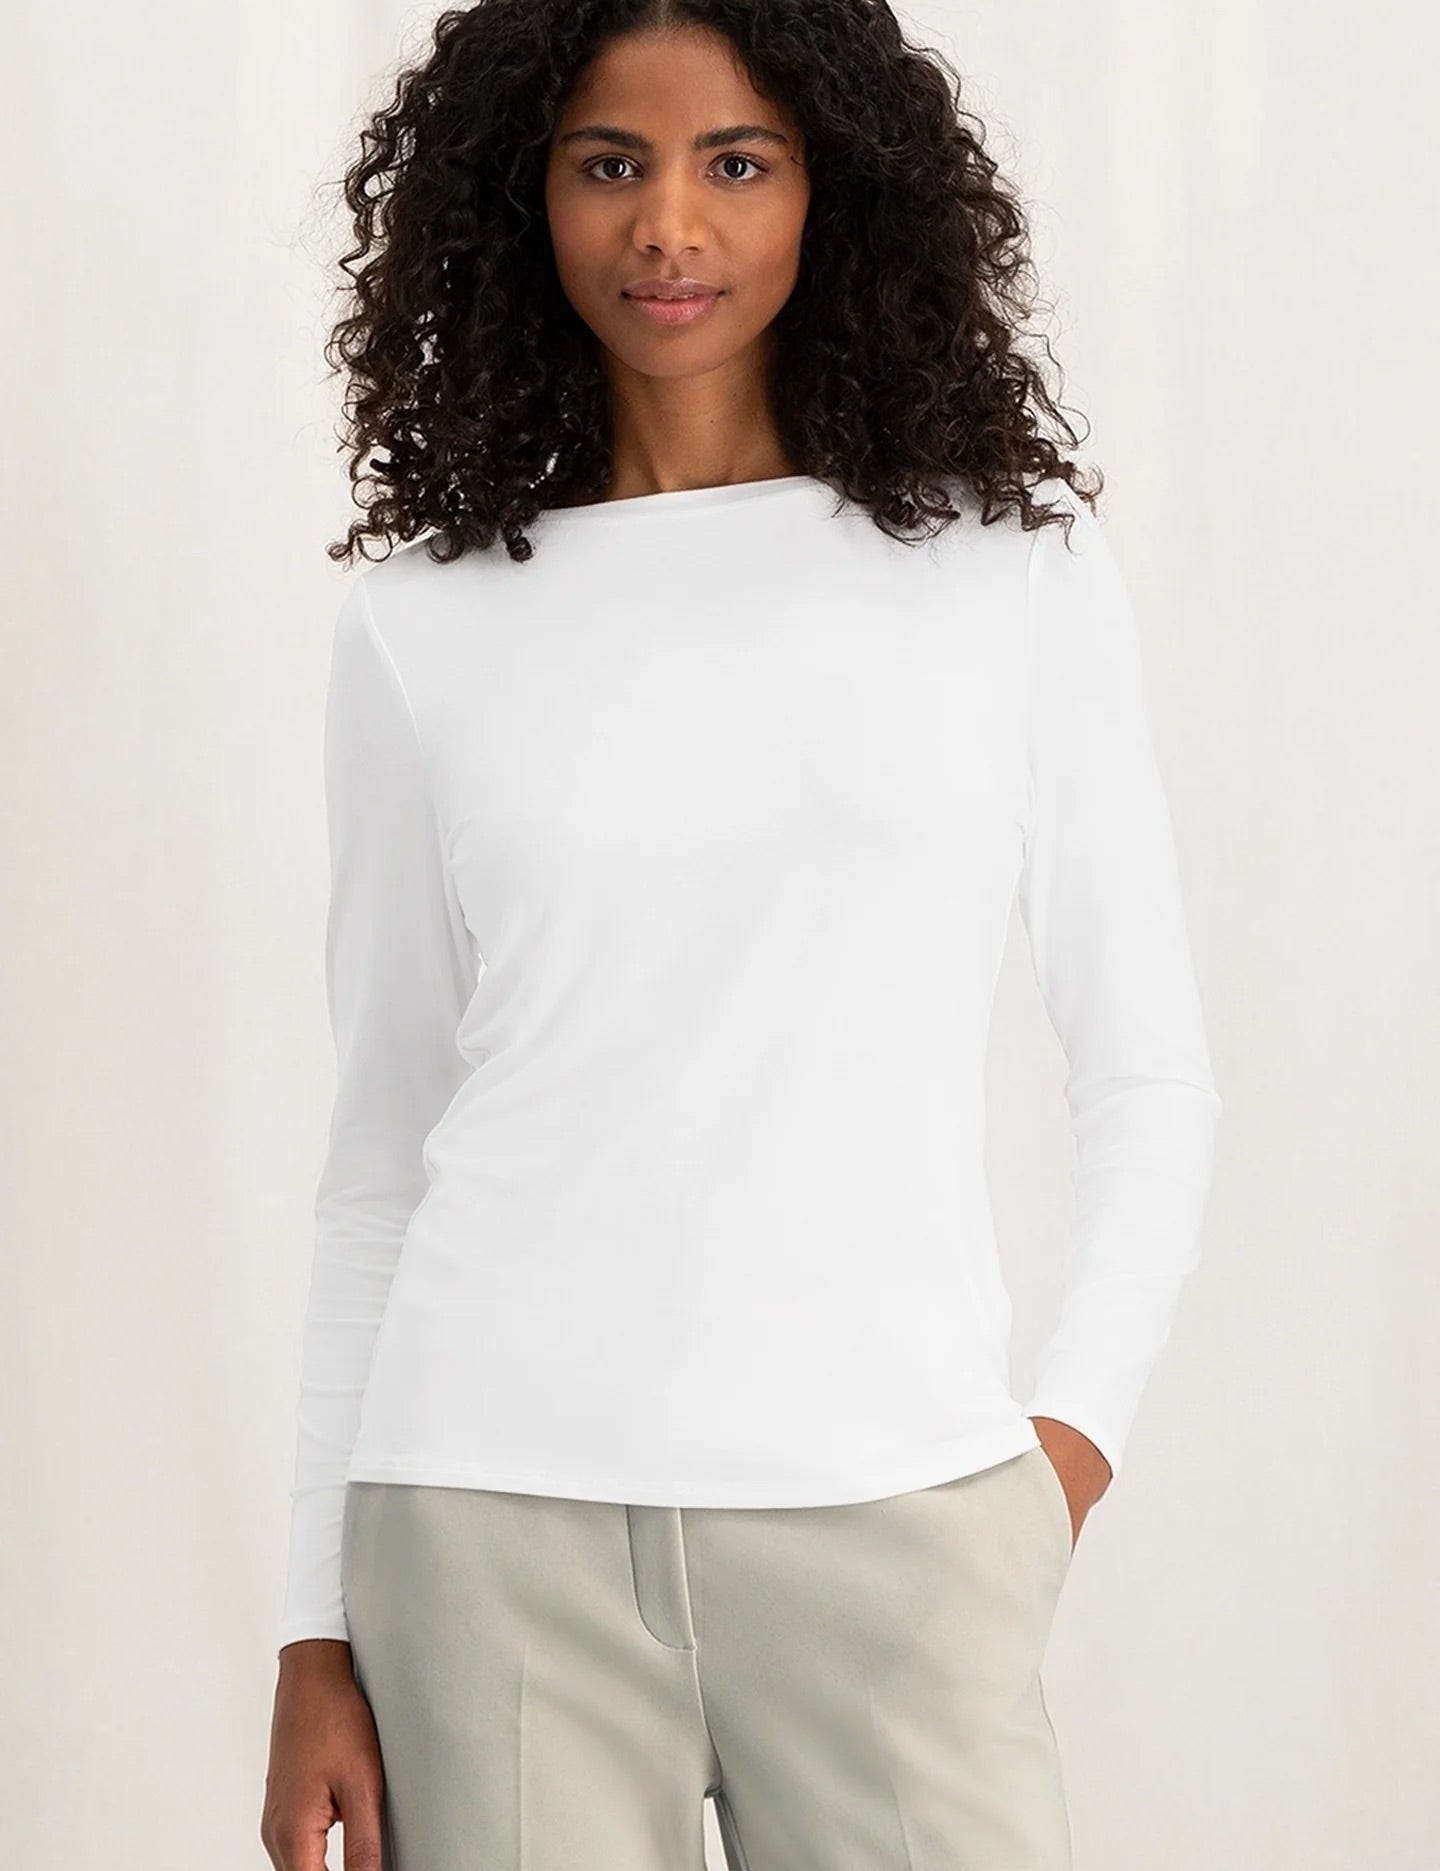 t-shirt-with-boatneck-and-long-sleeves-in-regular-fit-pure-white_f0d78486-9b33-4ed2-84de-5f0c110f06f6_2880x_jpg.jpg